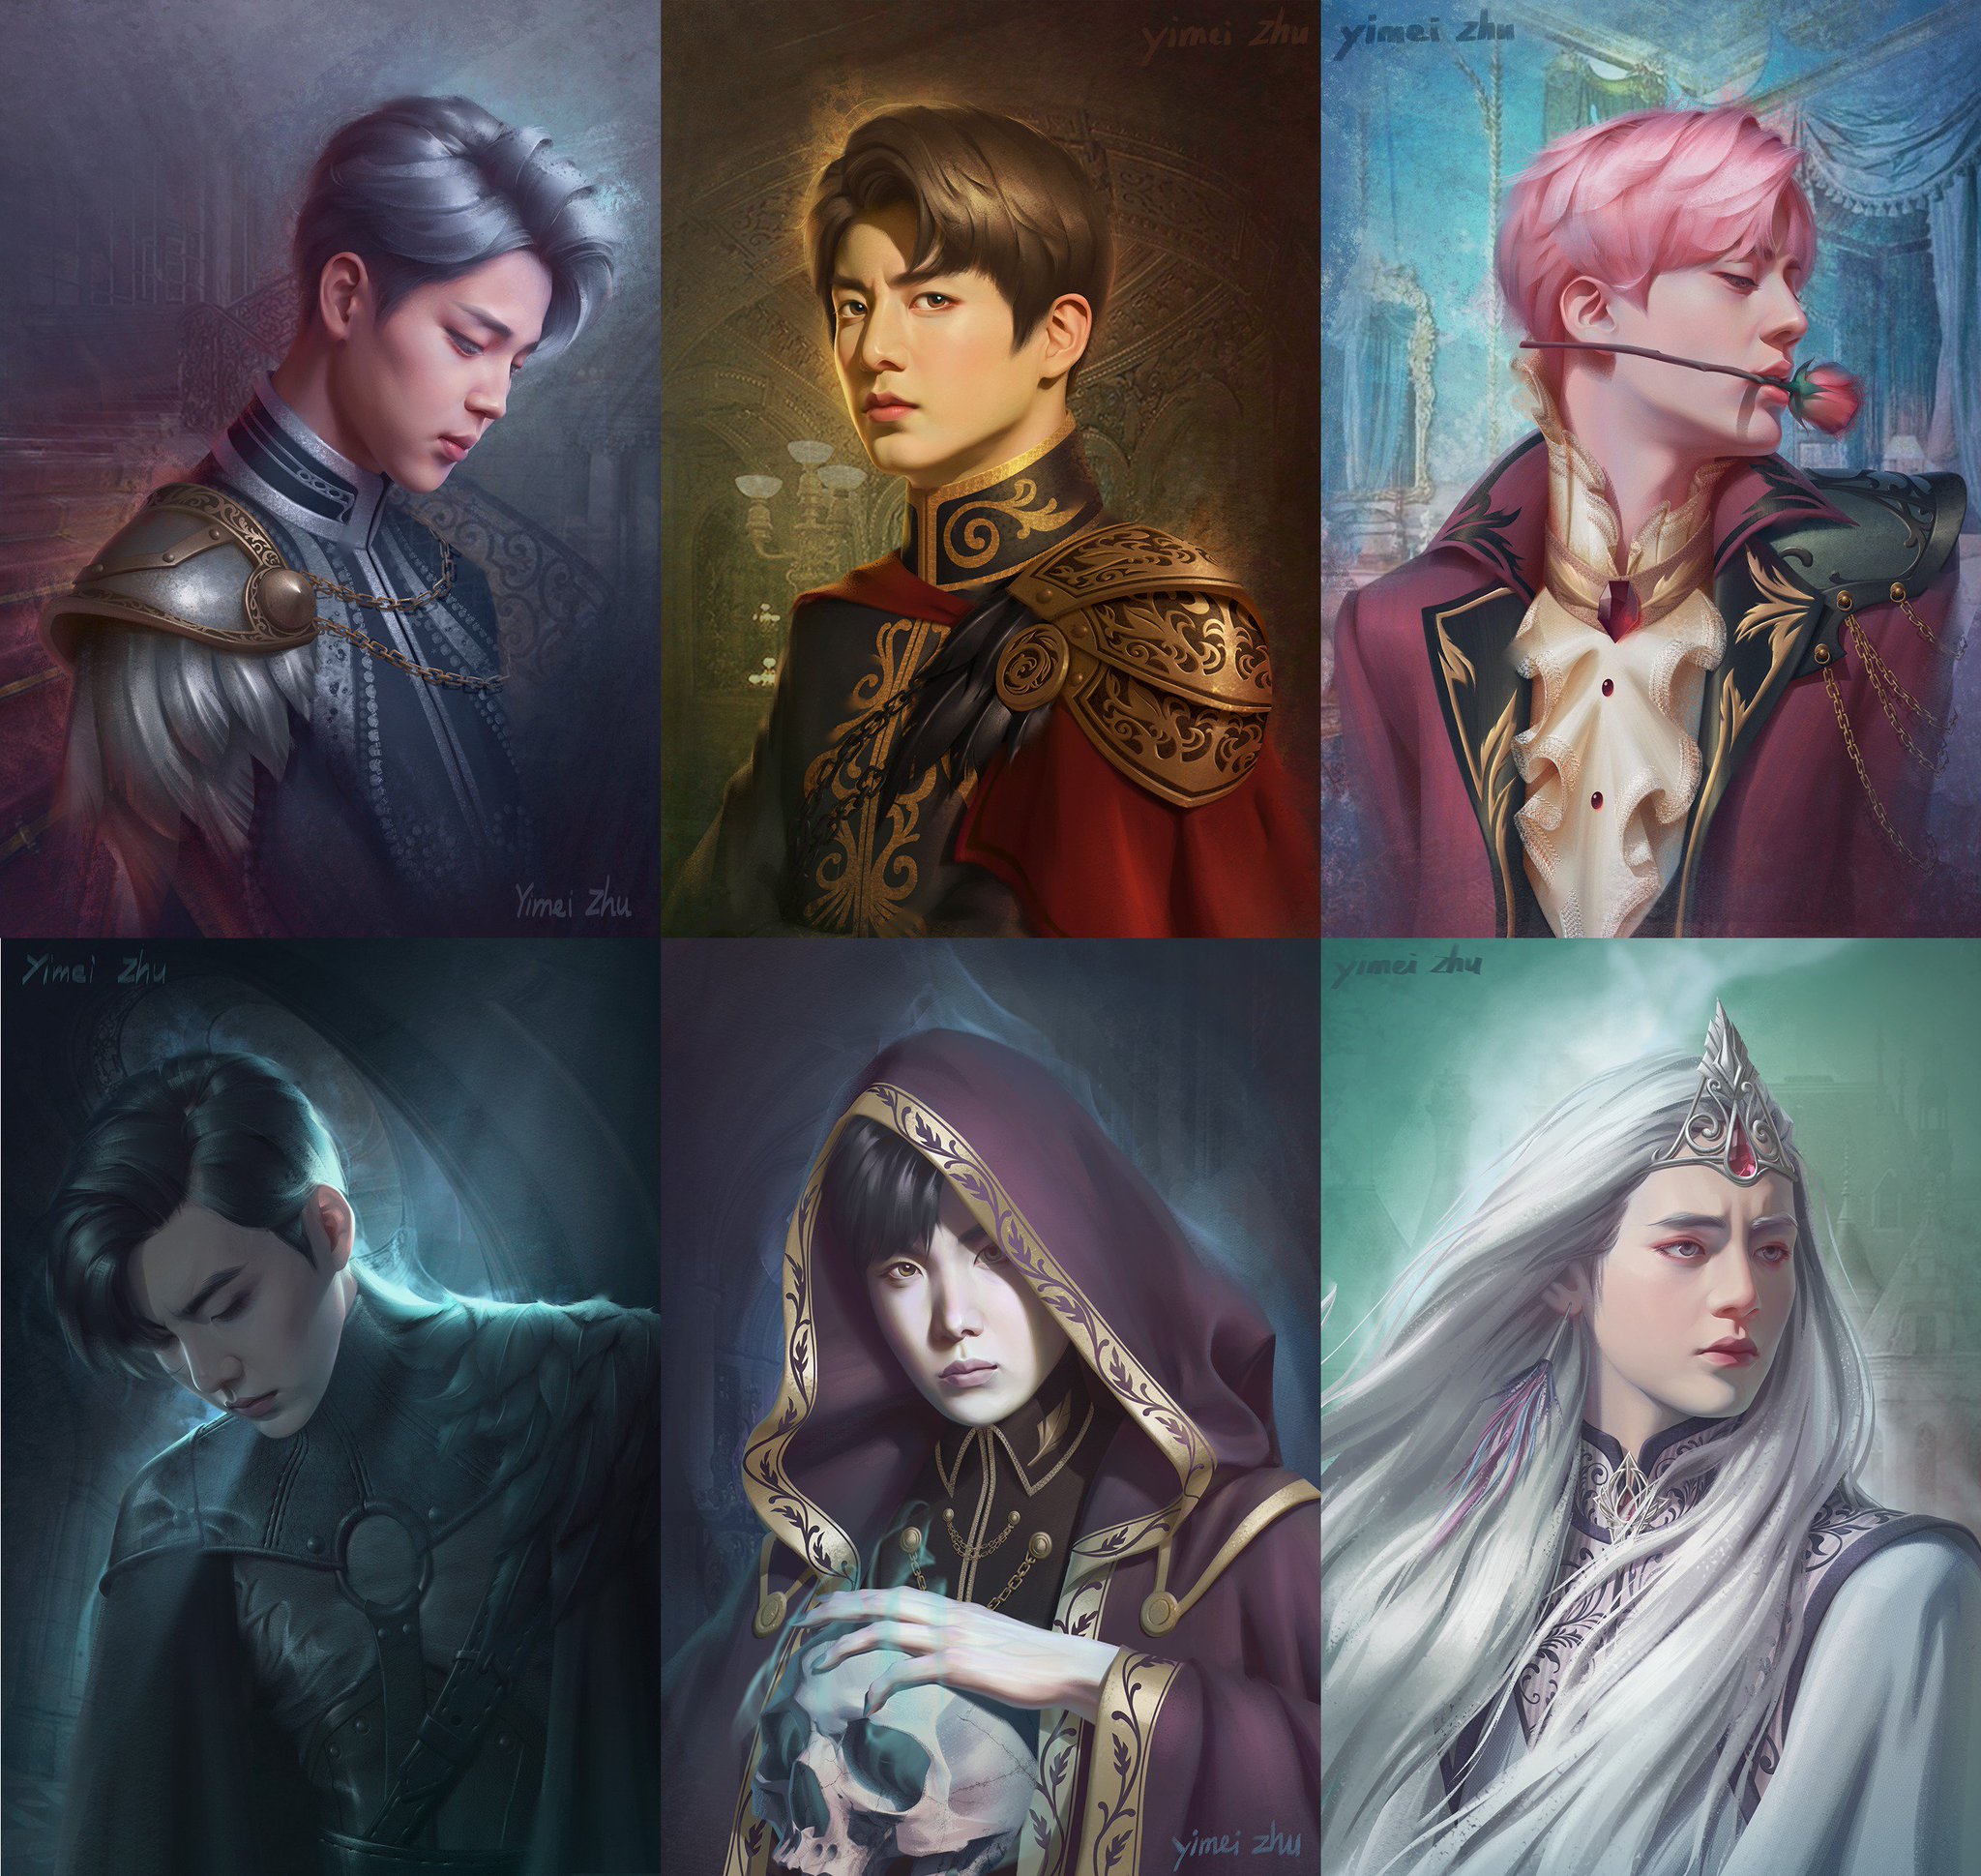 Yimei~BTS fanart~ on Twitter: "One more to go!! @BTS_twt # ...